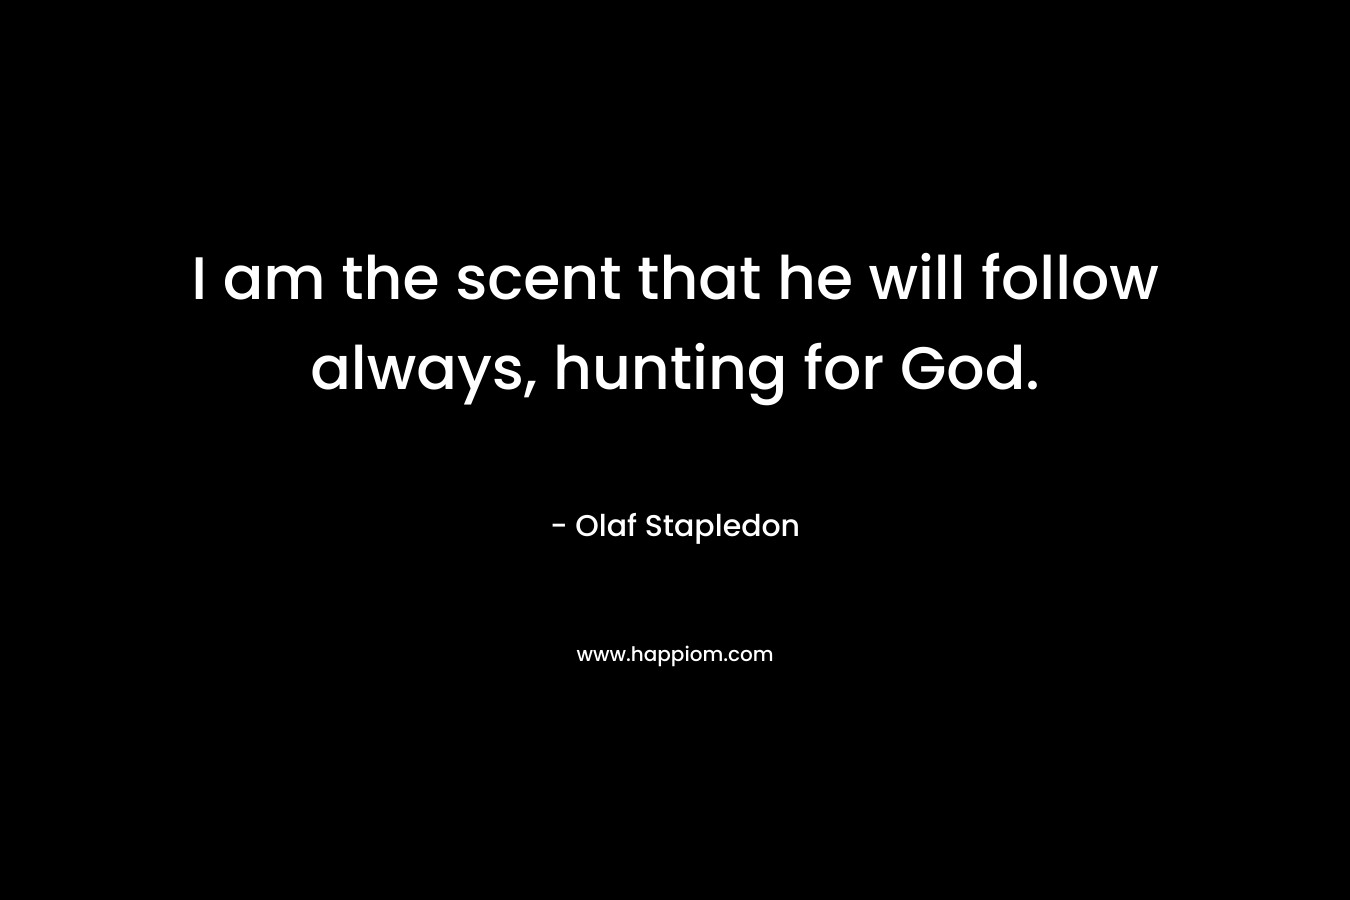 I am the scent that he will follow always, hunting for God.